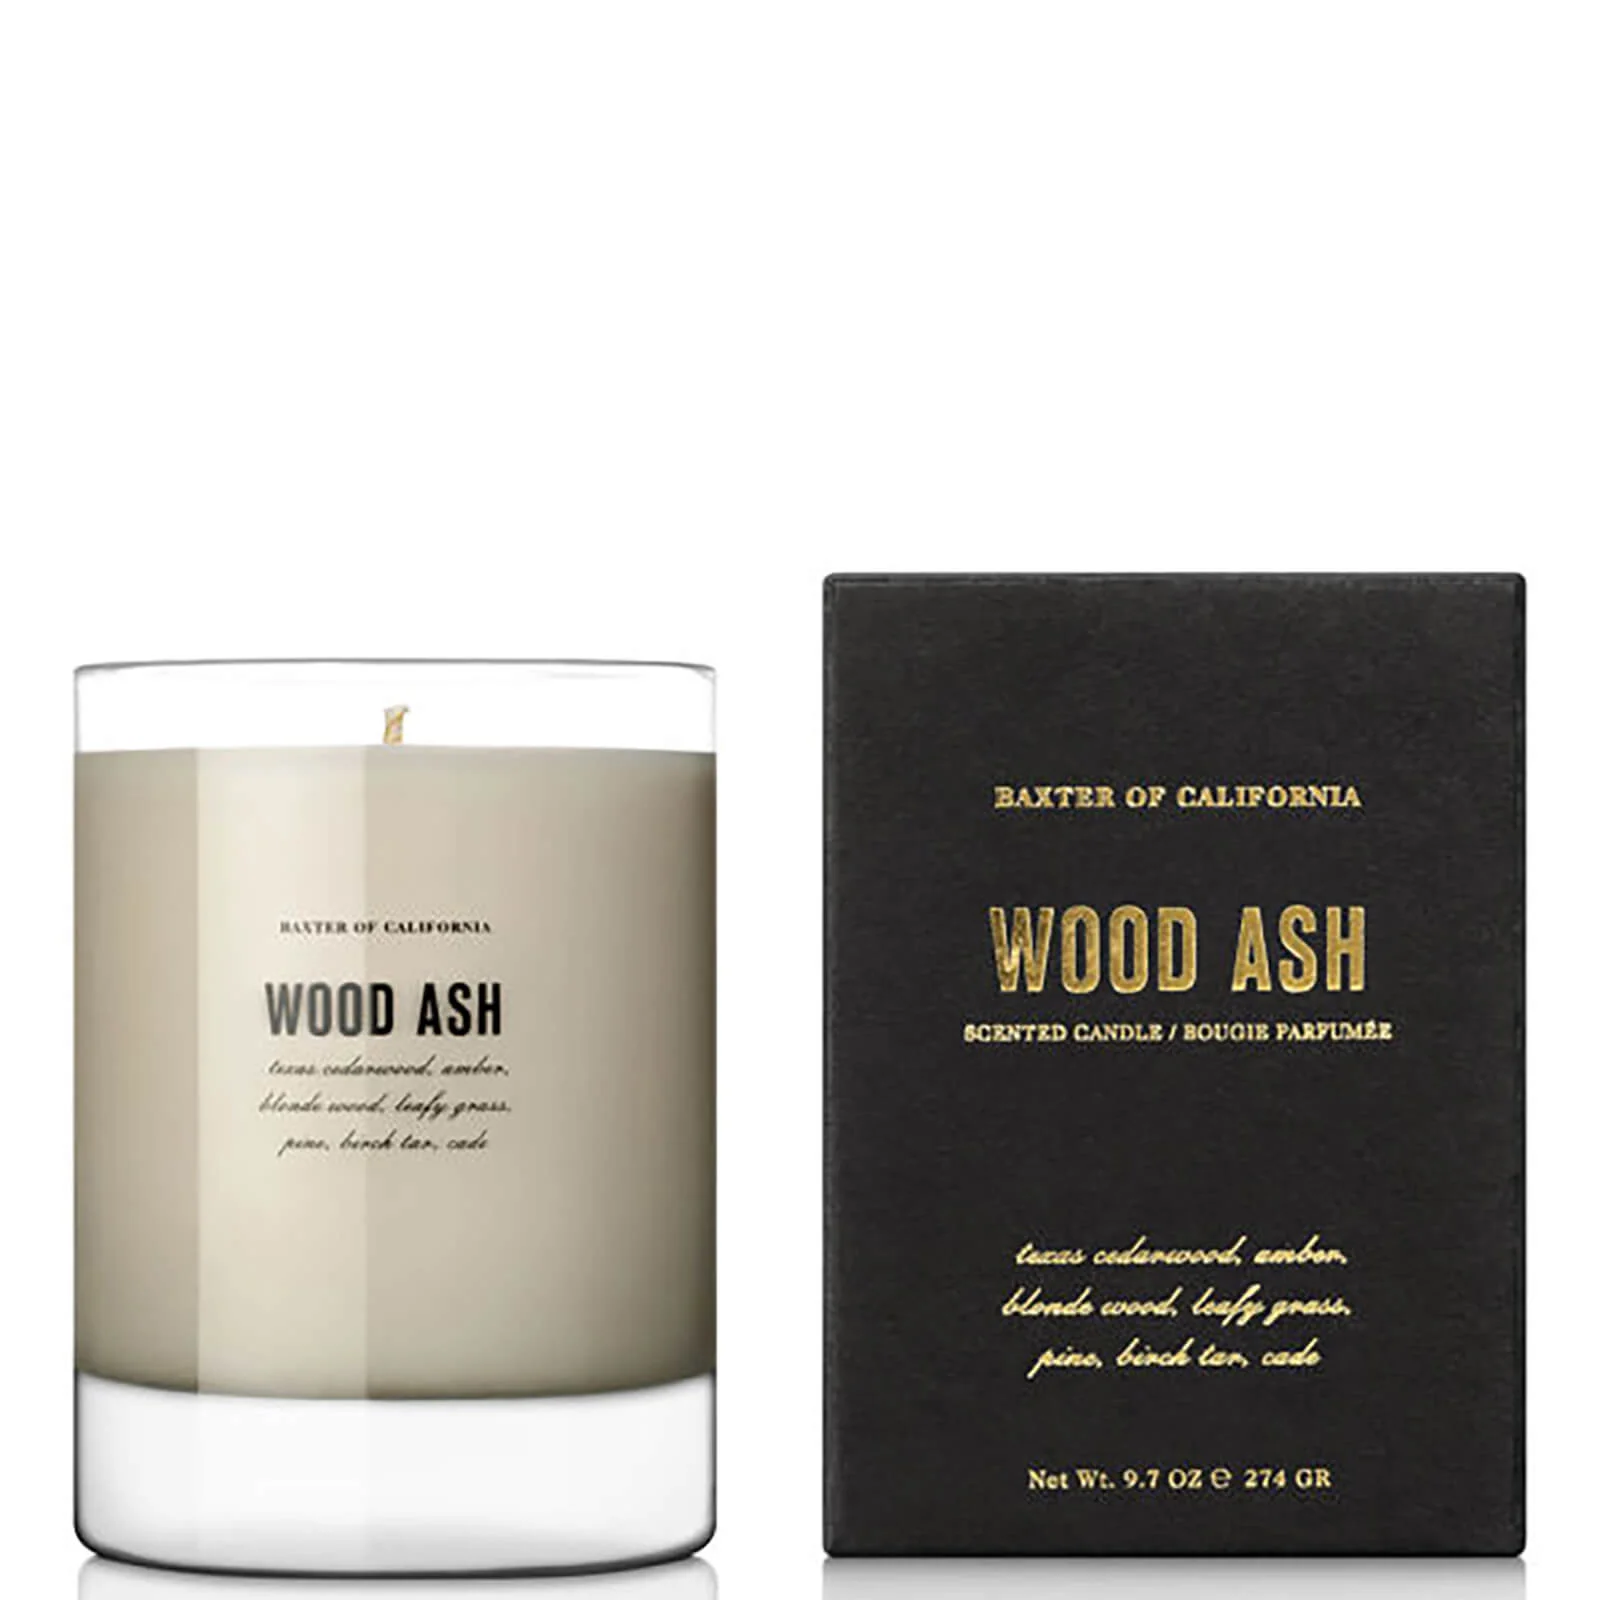 Baxter of California Wood Ash Scented Candle Image 1